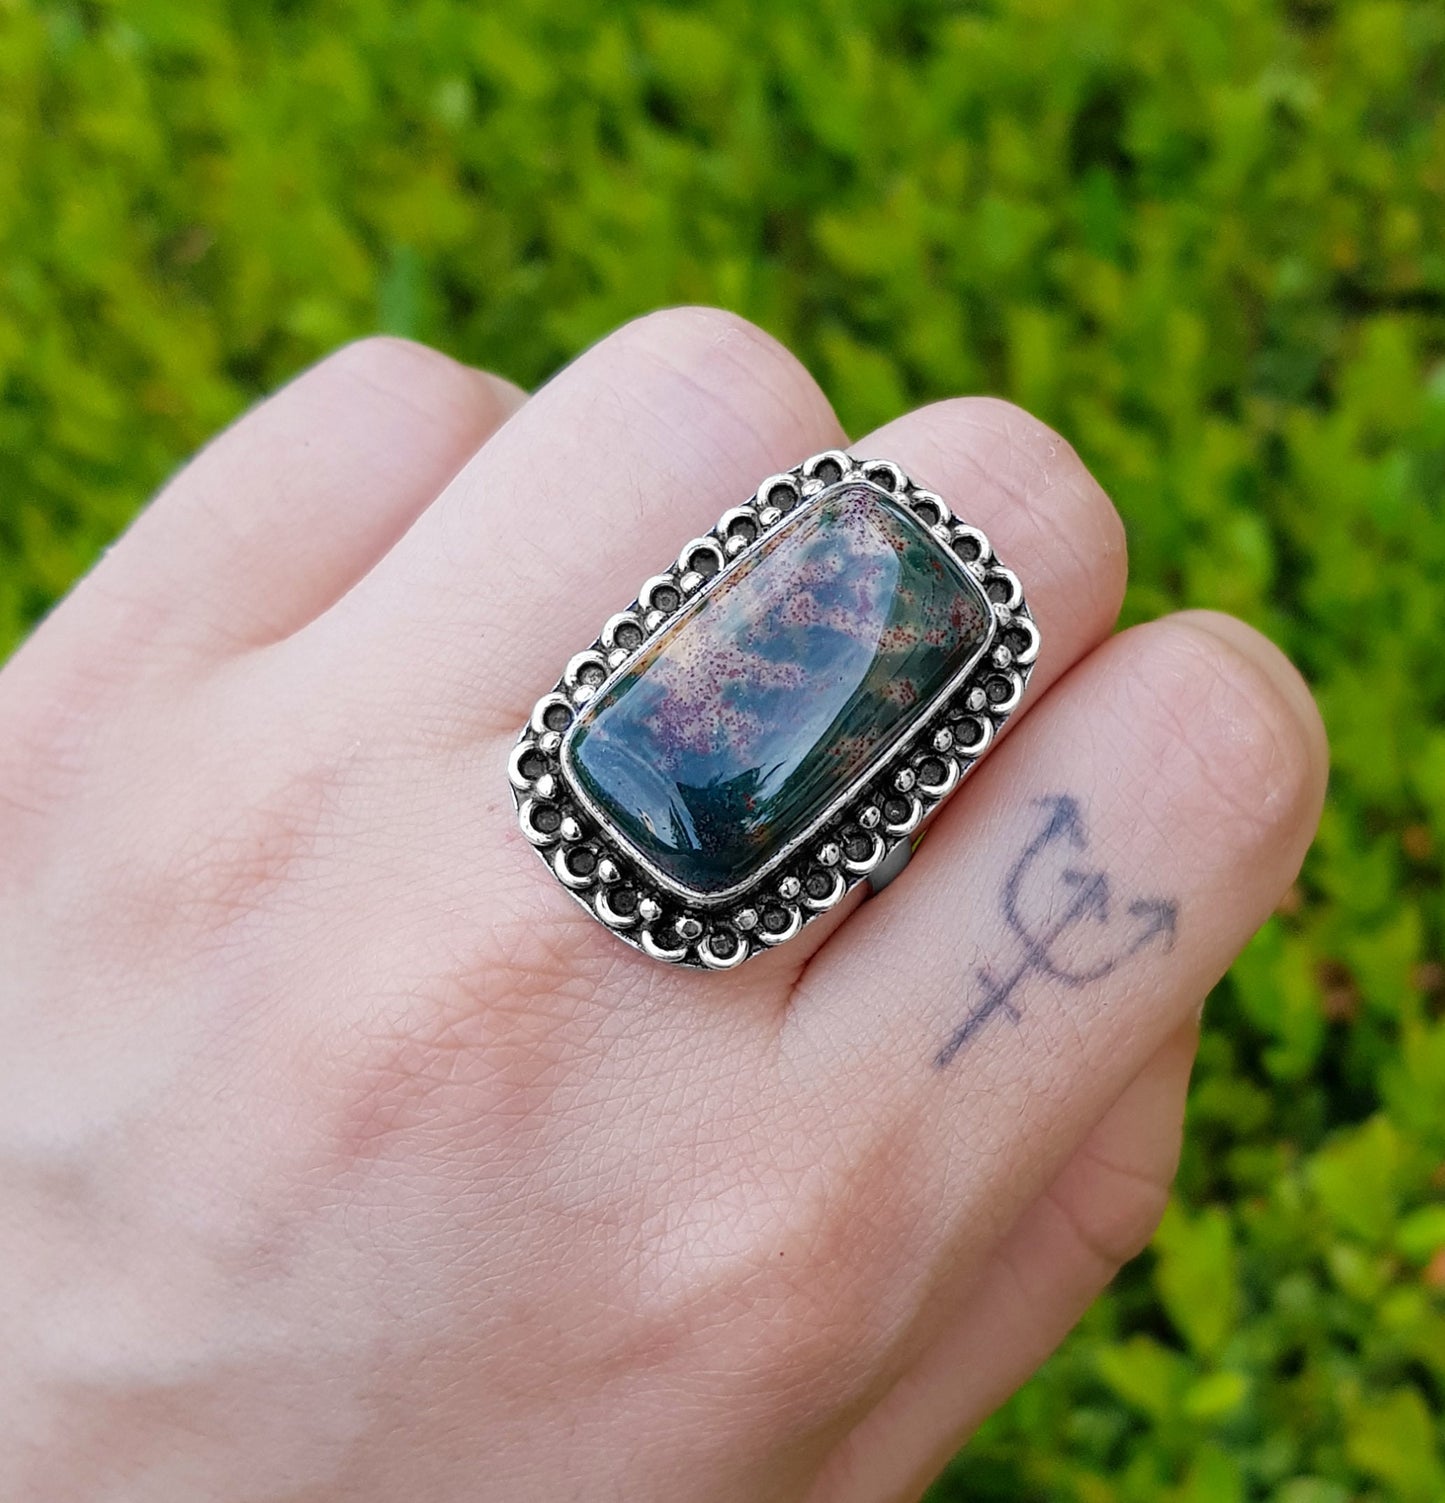 Bloodstone Birthstone Ring Size US 9 Sterling Silver Boho Ring Unisex Ring One Of A Kind Gift GypsyJewelry Crystal Ring